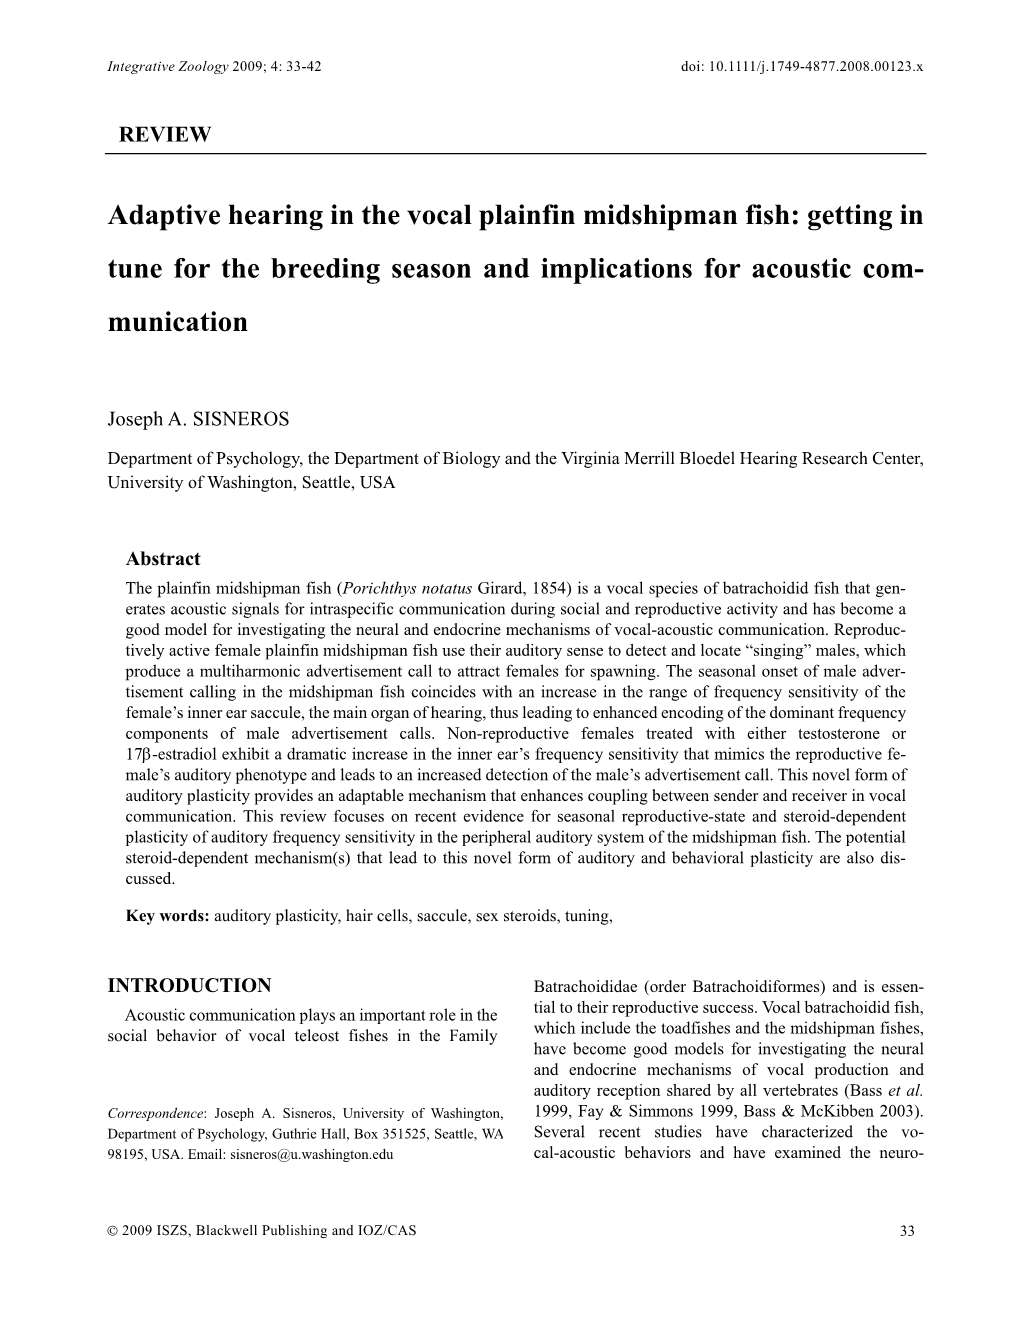 Adaptive Hearing in the Vocal Plainfin Midshipman Fish: Getting in Tune for the Breeding Season and Implications for Acoustic Com- Munication